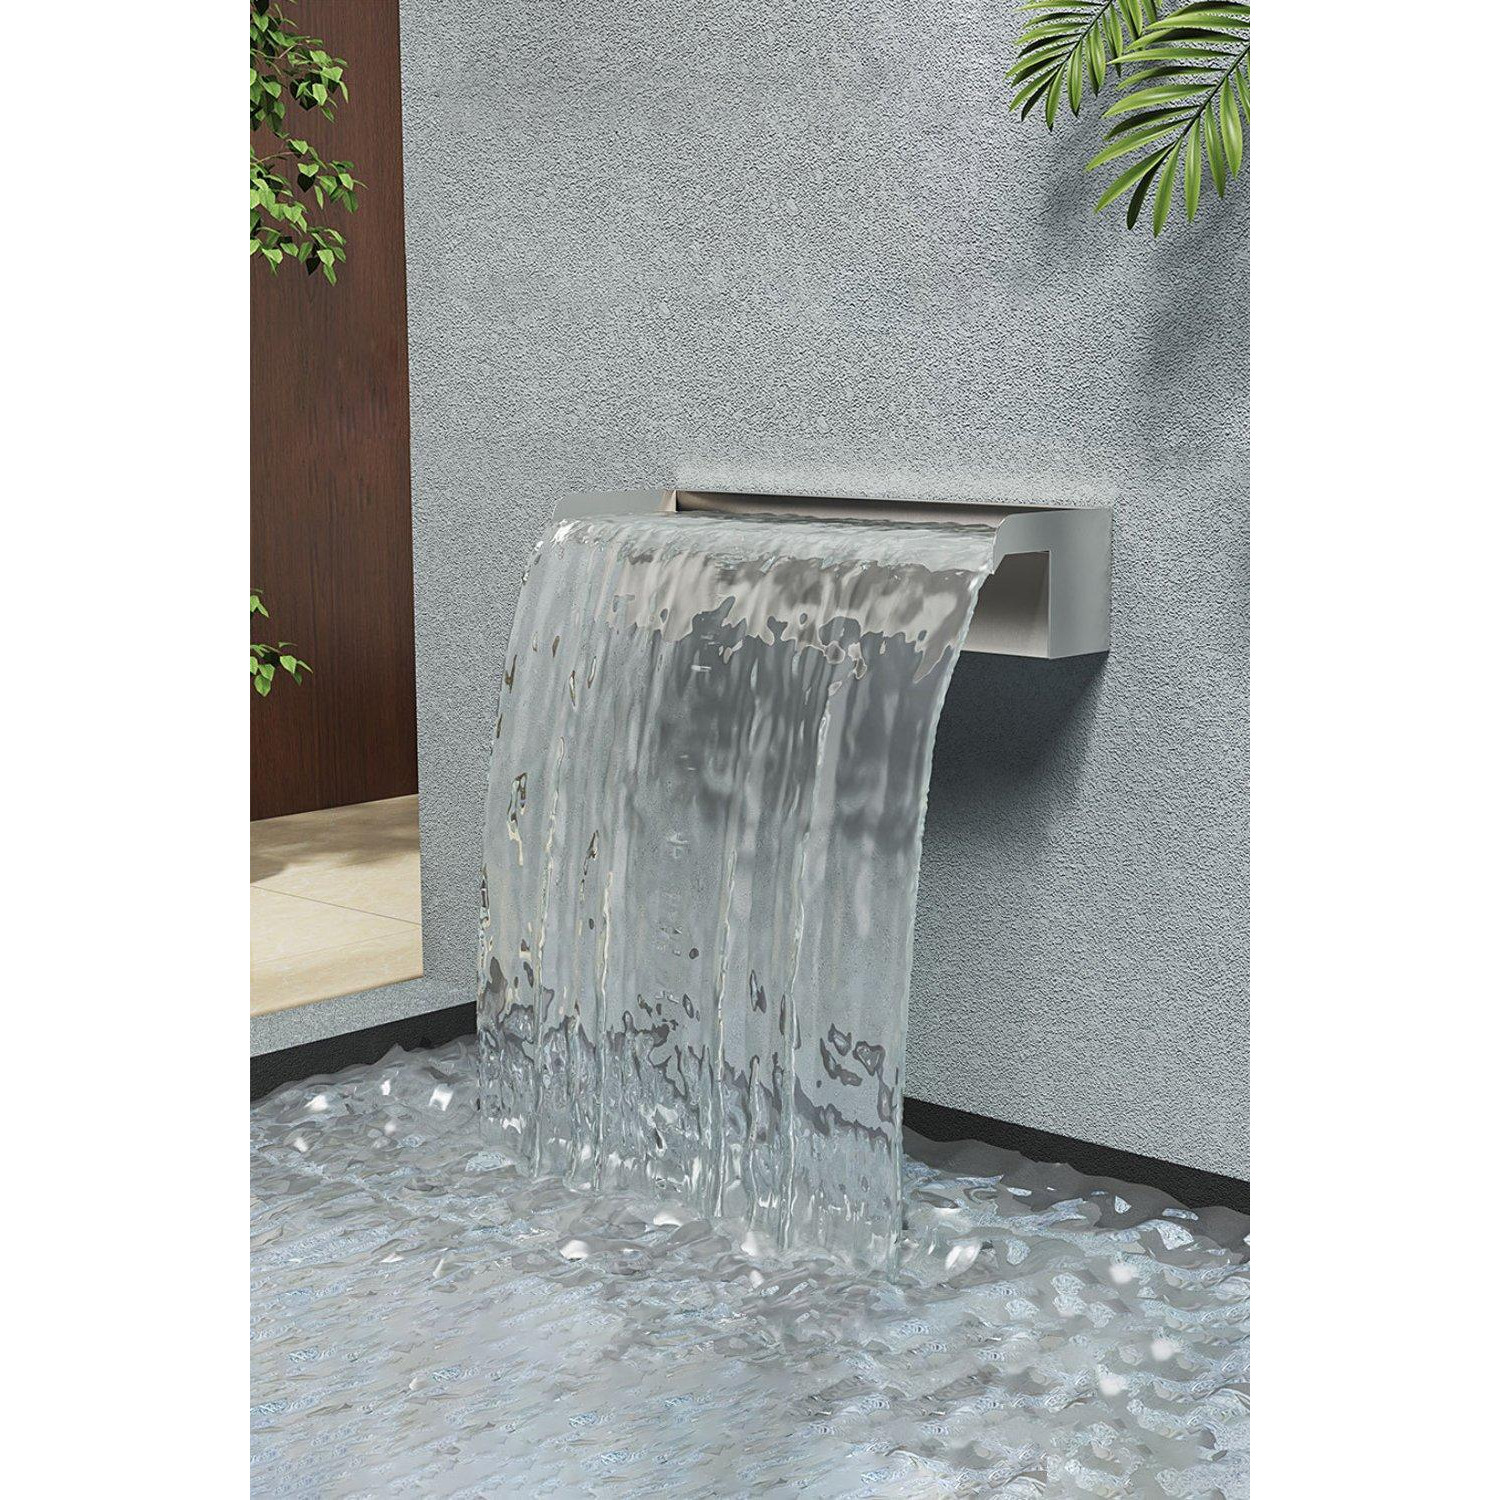 40cmW Back Entry Stainless Steel Wall-Mounted Water Blade Waterfall Pool Garden - image 1